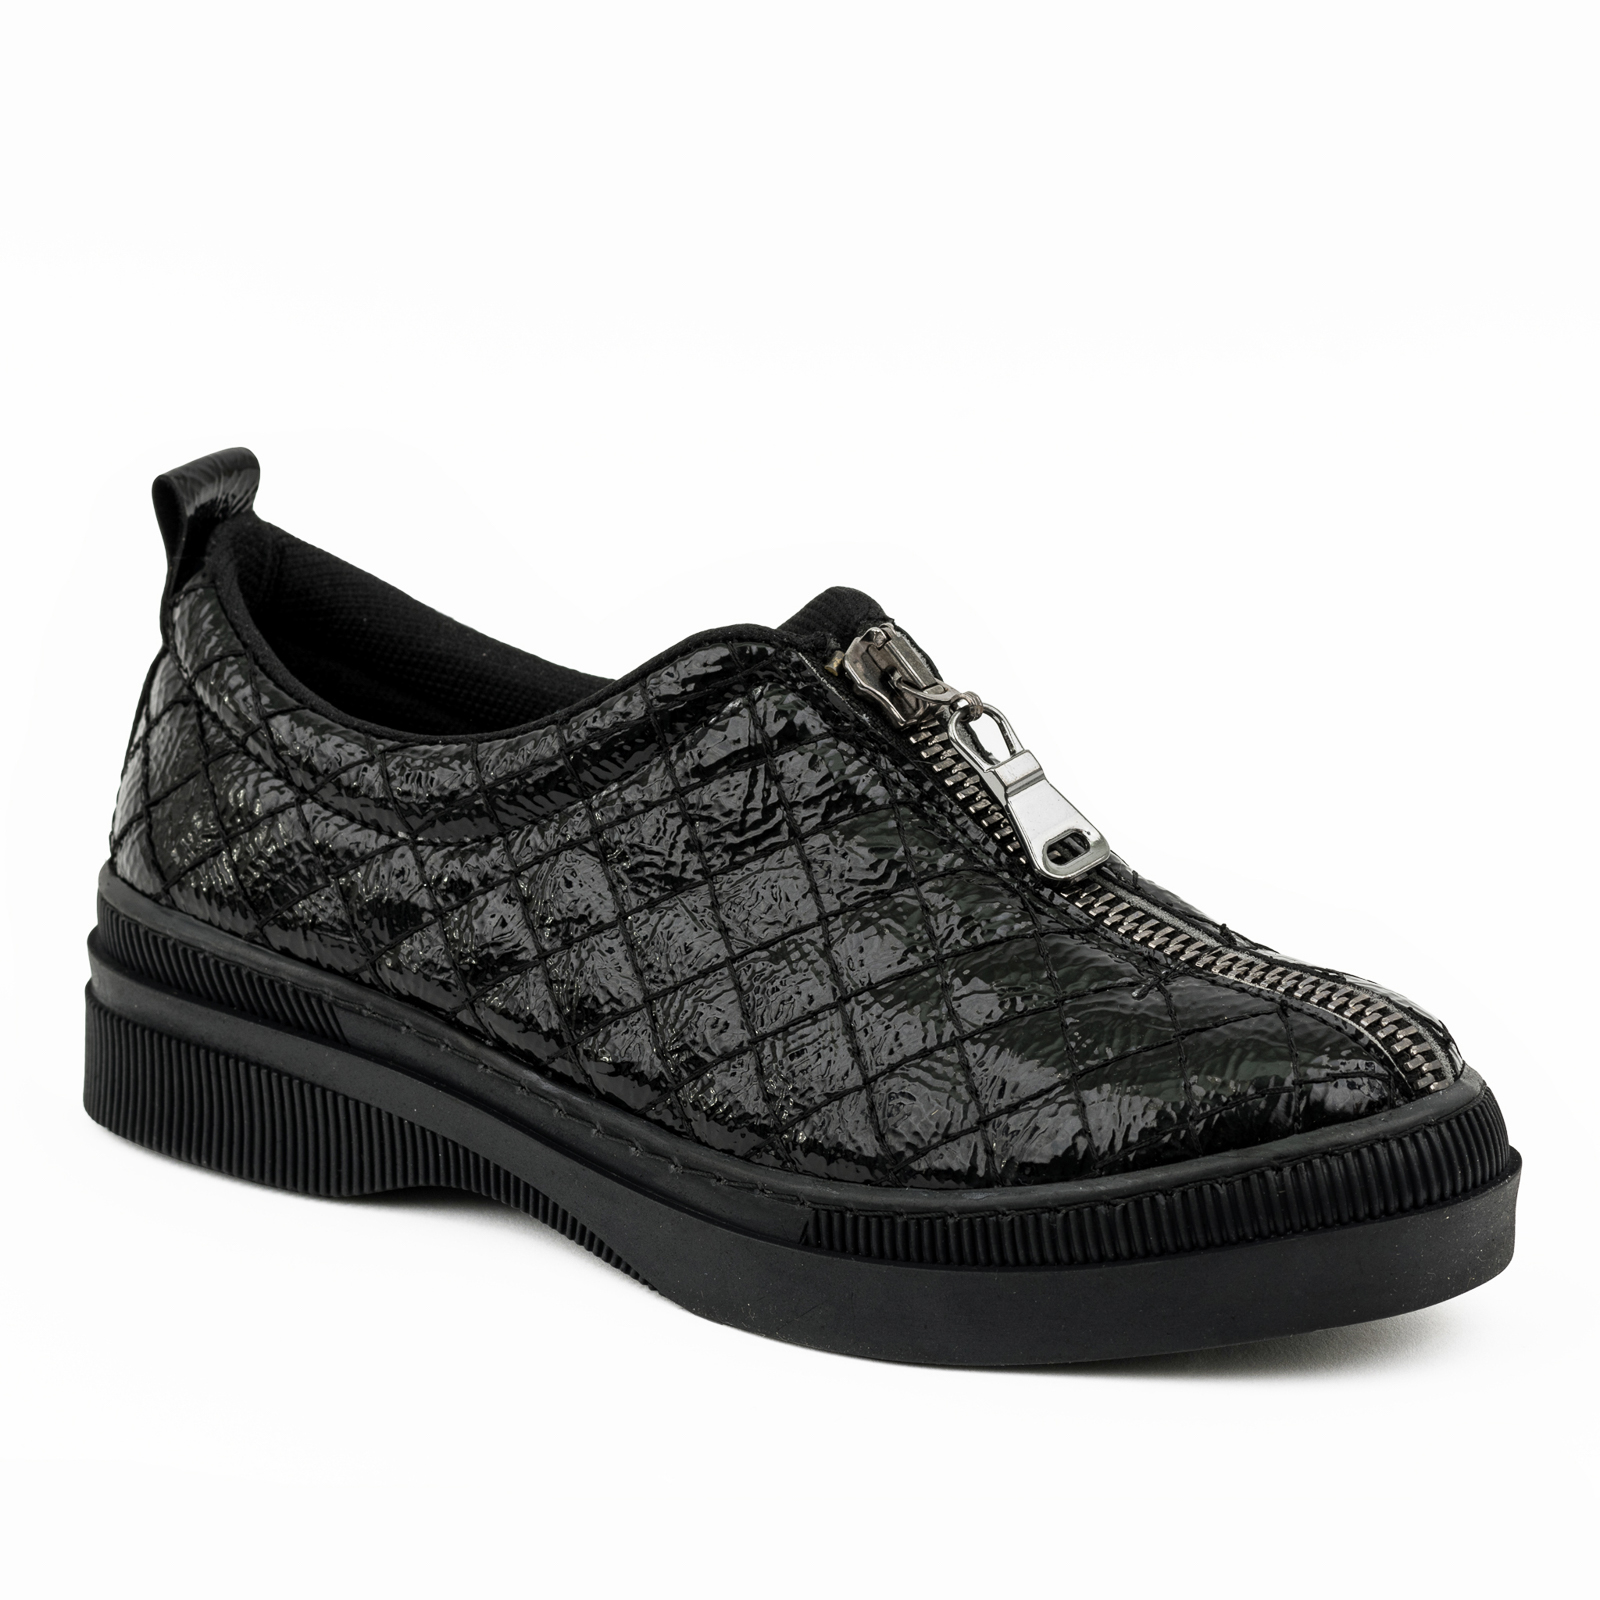 SEW SNEAKERS WITH ZIPPER - BLACK